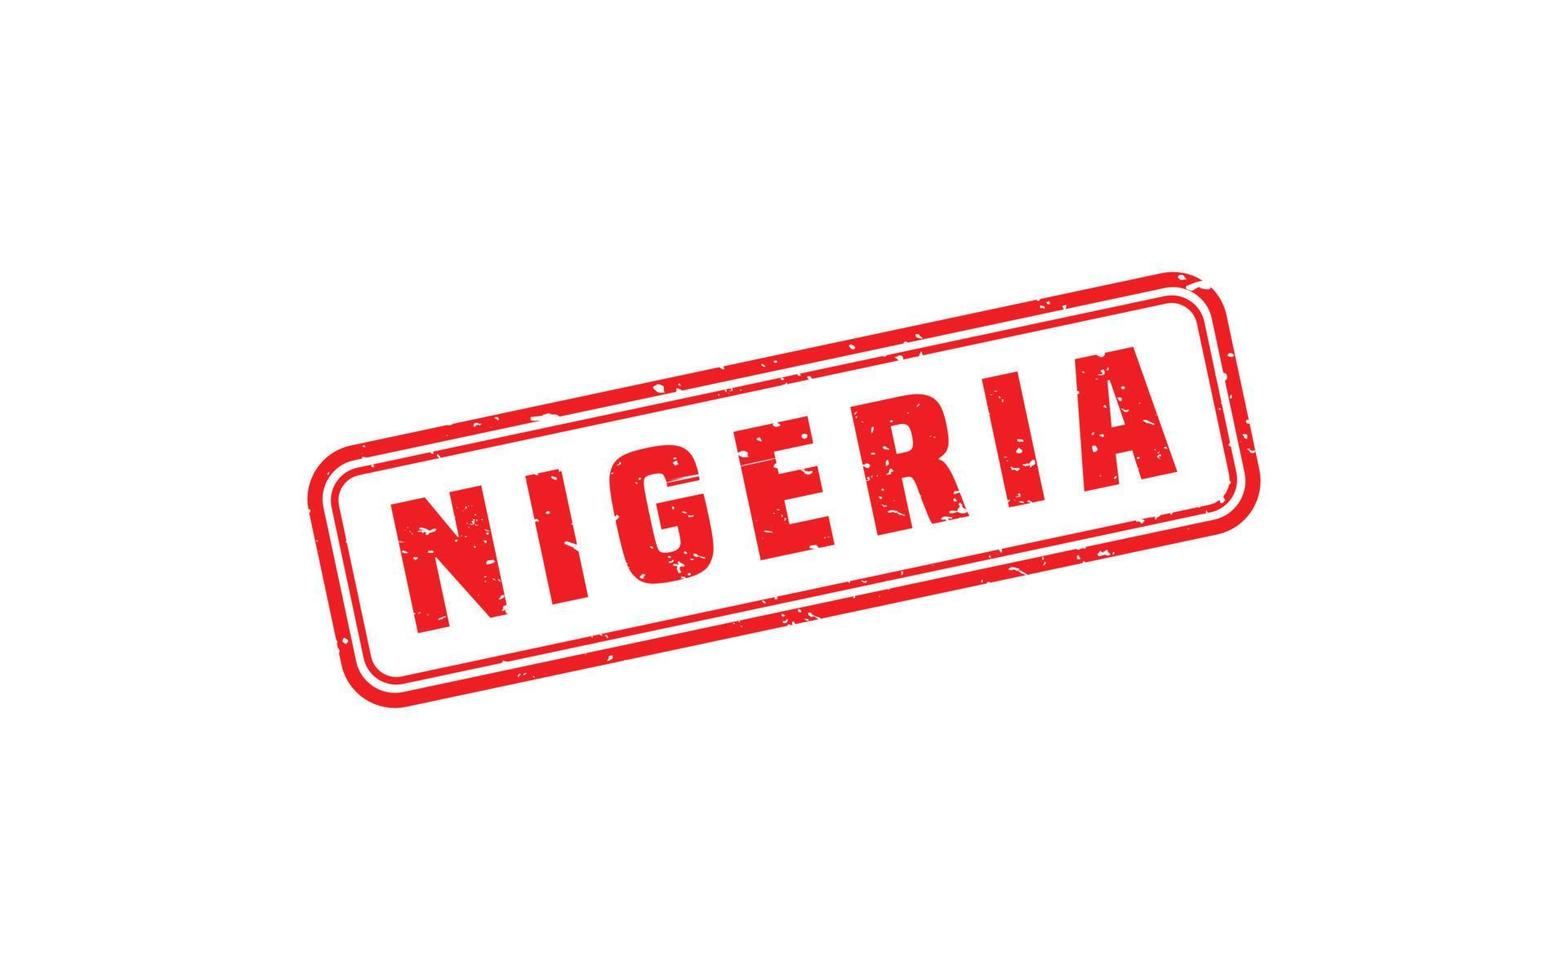 NIGERIA stamp rubber with grunge style on white background vector